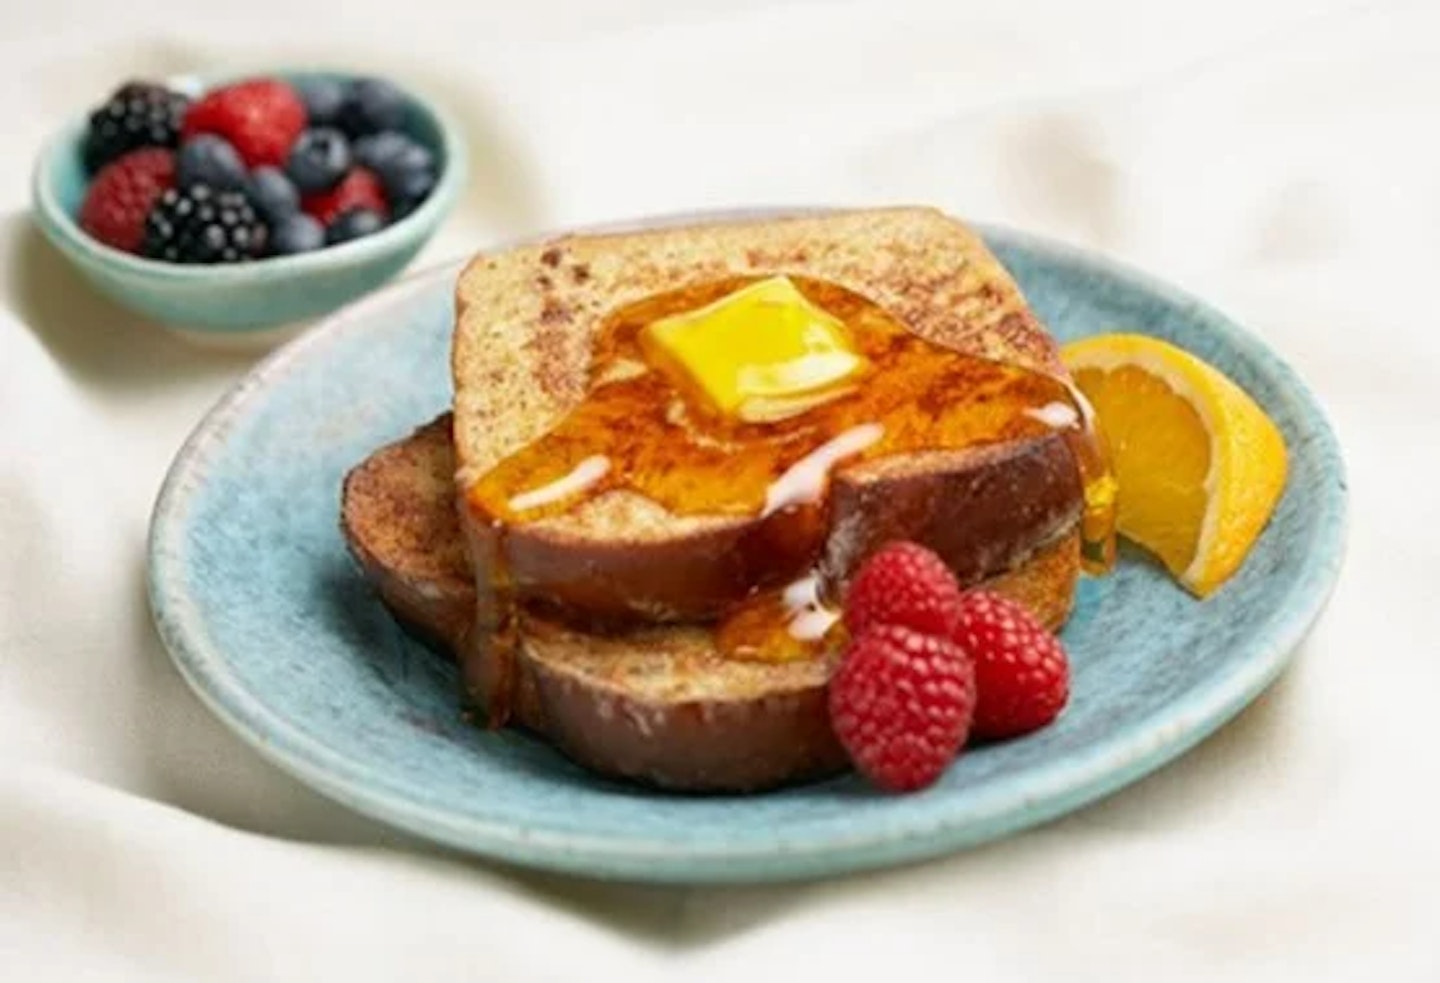 French toast (eggy bread)